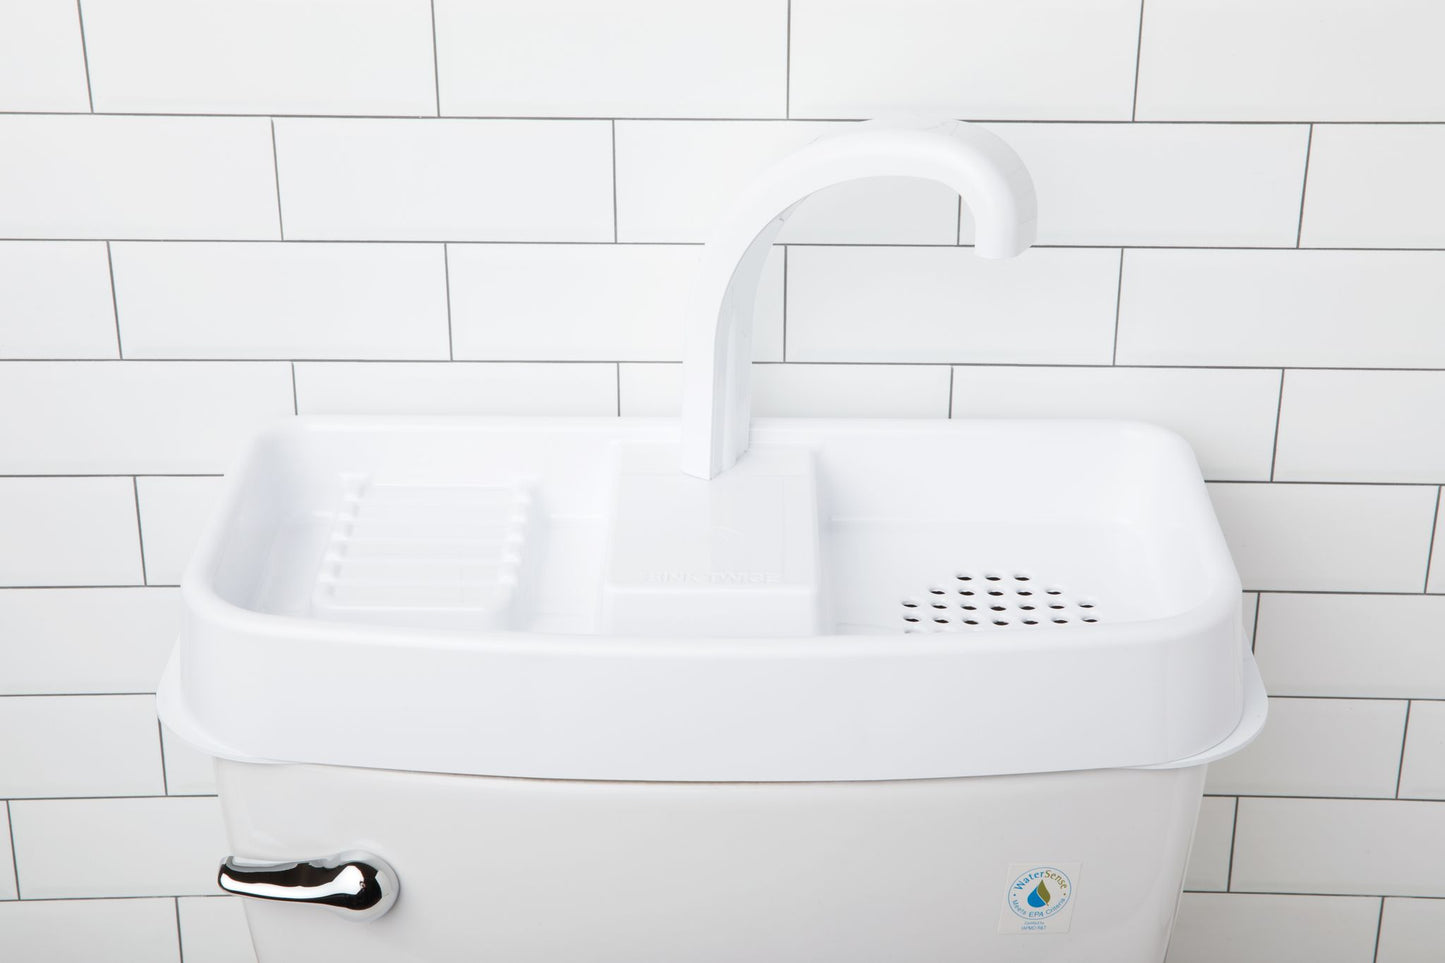 Adaptable Sink Twice for toilet tanks 16.8" - 20.3" wide measured with tank lid off